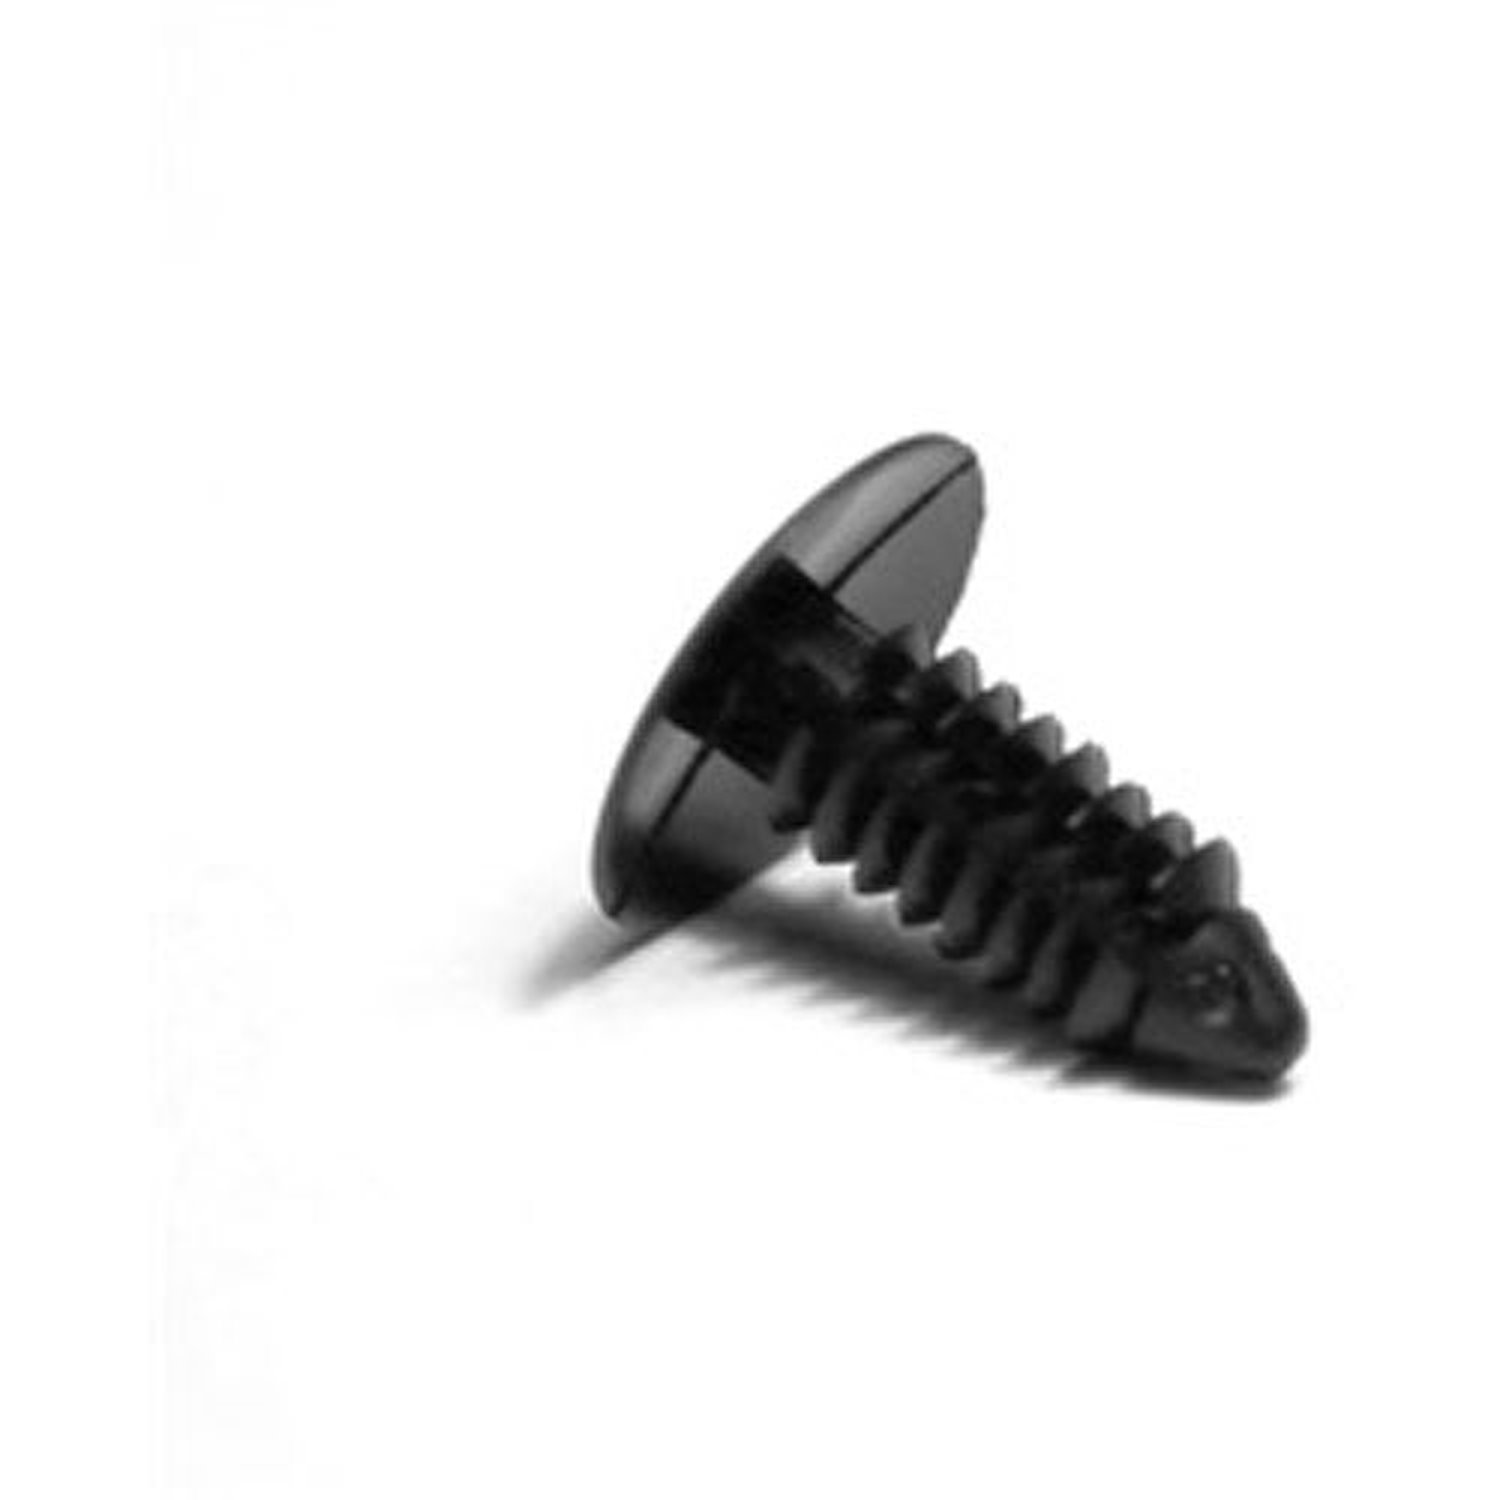 This black plastic Christmas tree style push retainer from Omix-ADA fits 07-16 Jeep Wrangler fender flares.